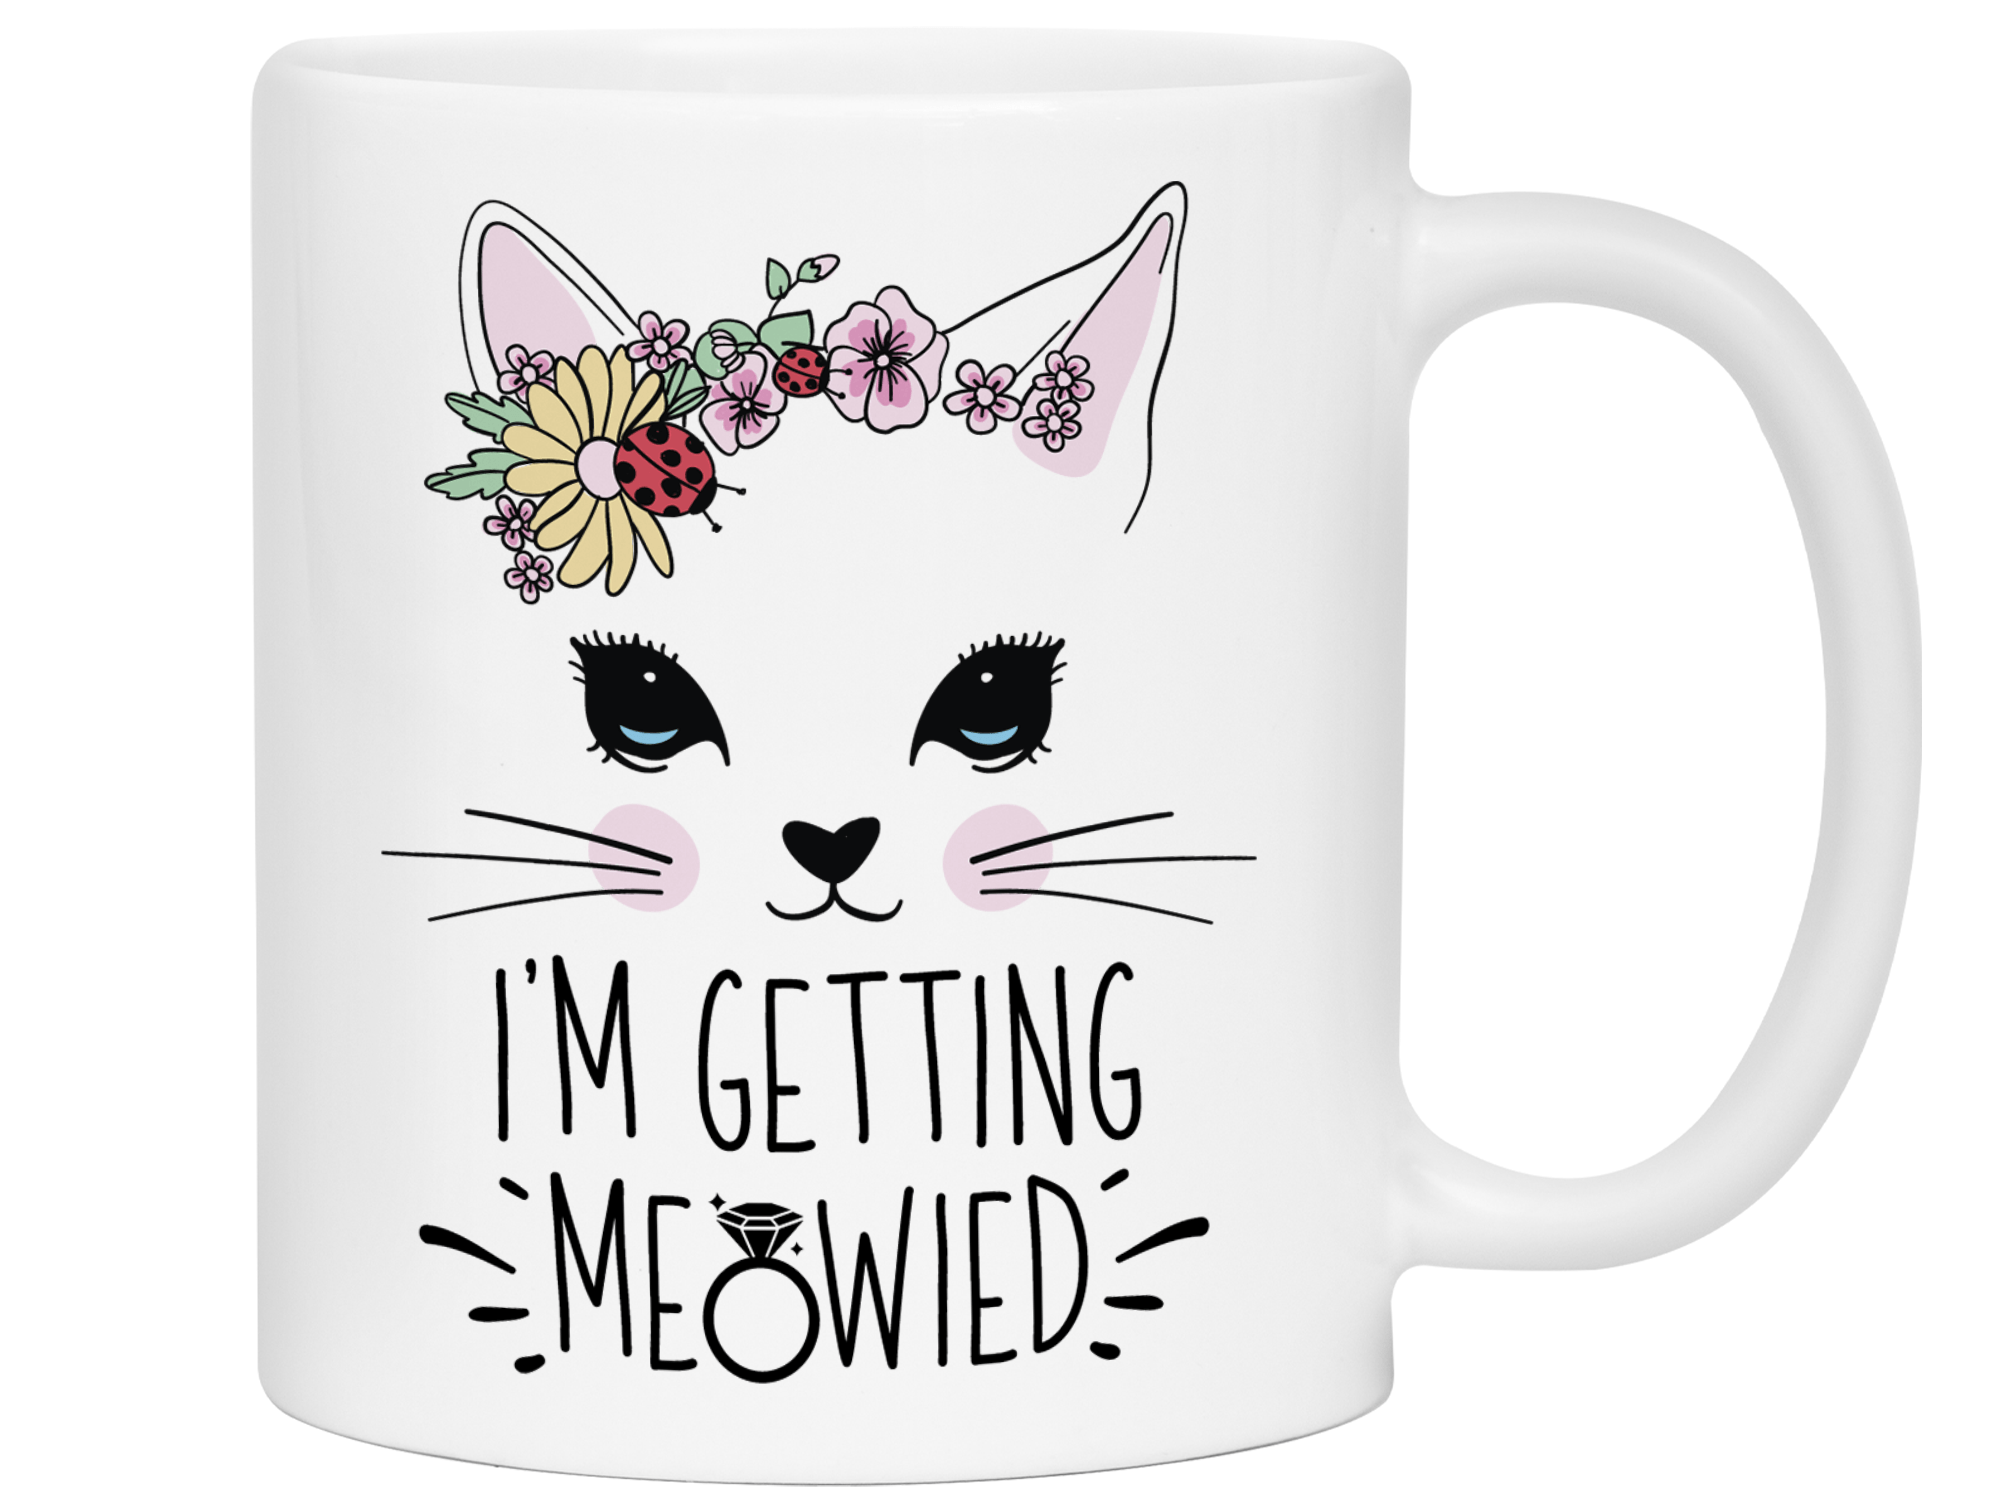 I'm Getting Meowied Funny Coffee Mug | Getting Married | Bride to Be Gift Idea